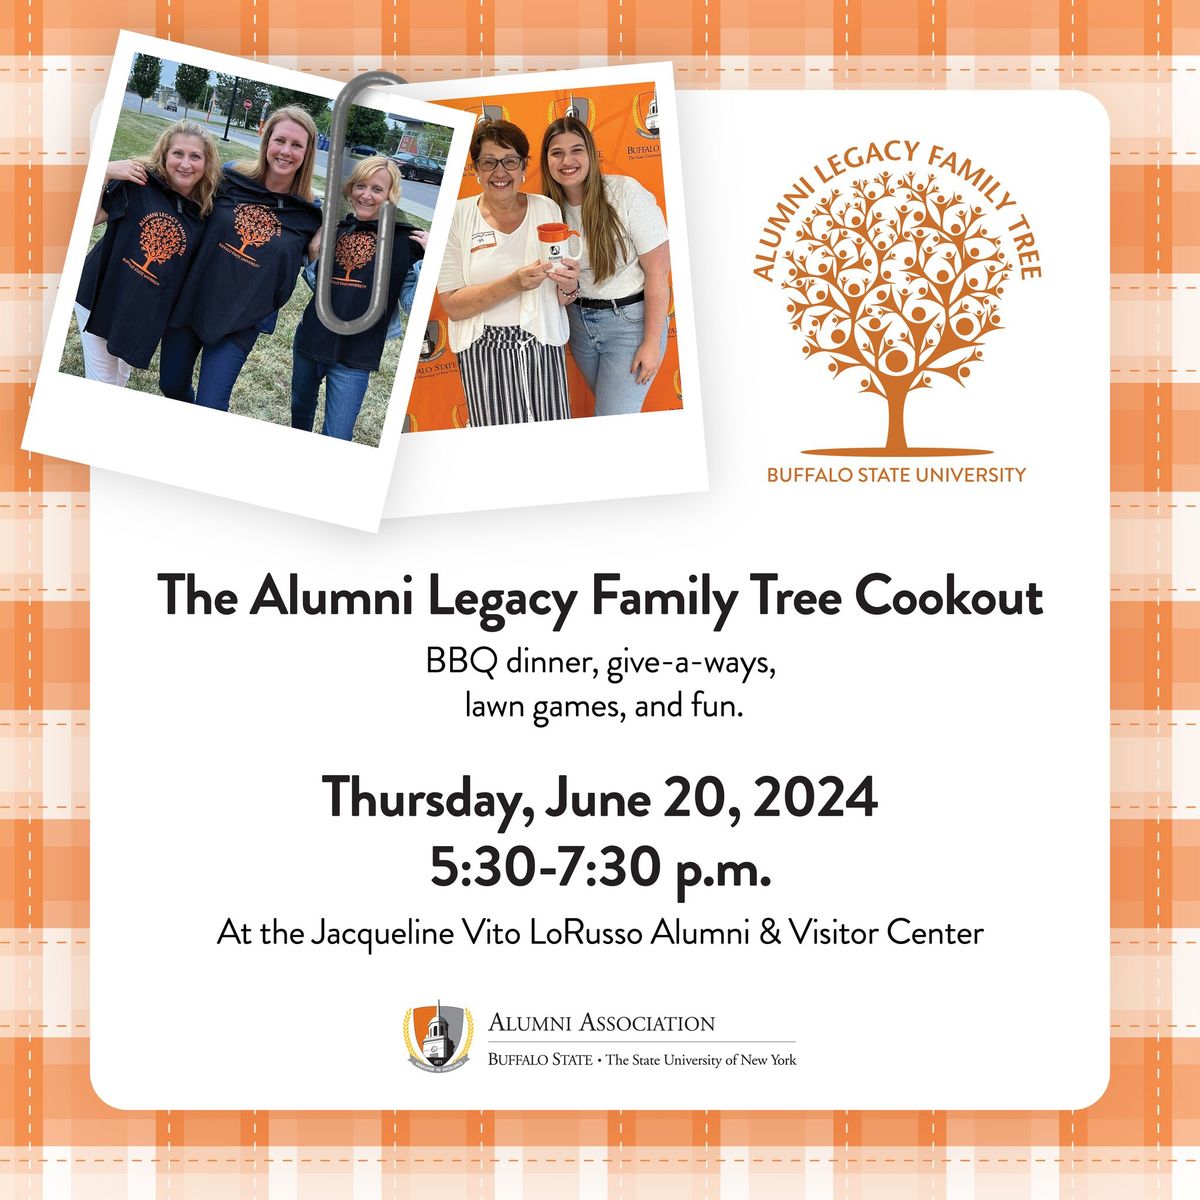 Alumni Legacy Family Tree Cookout